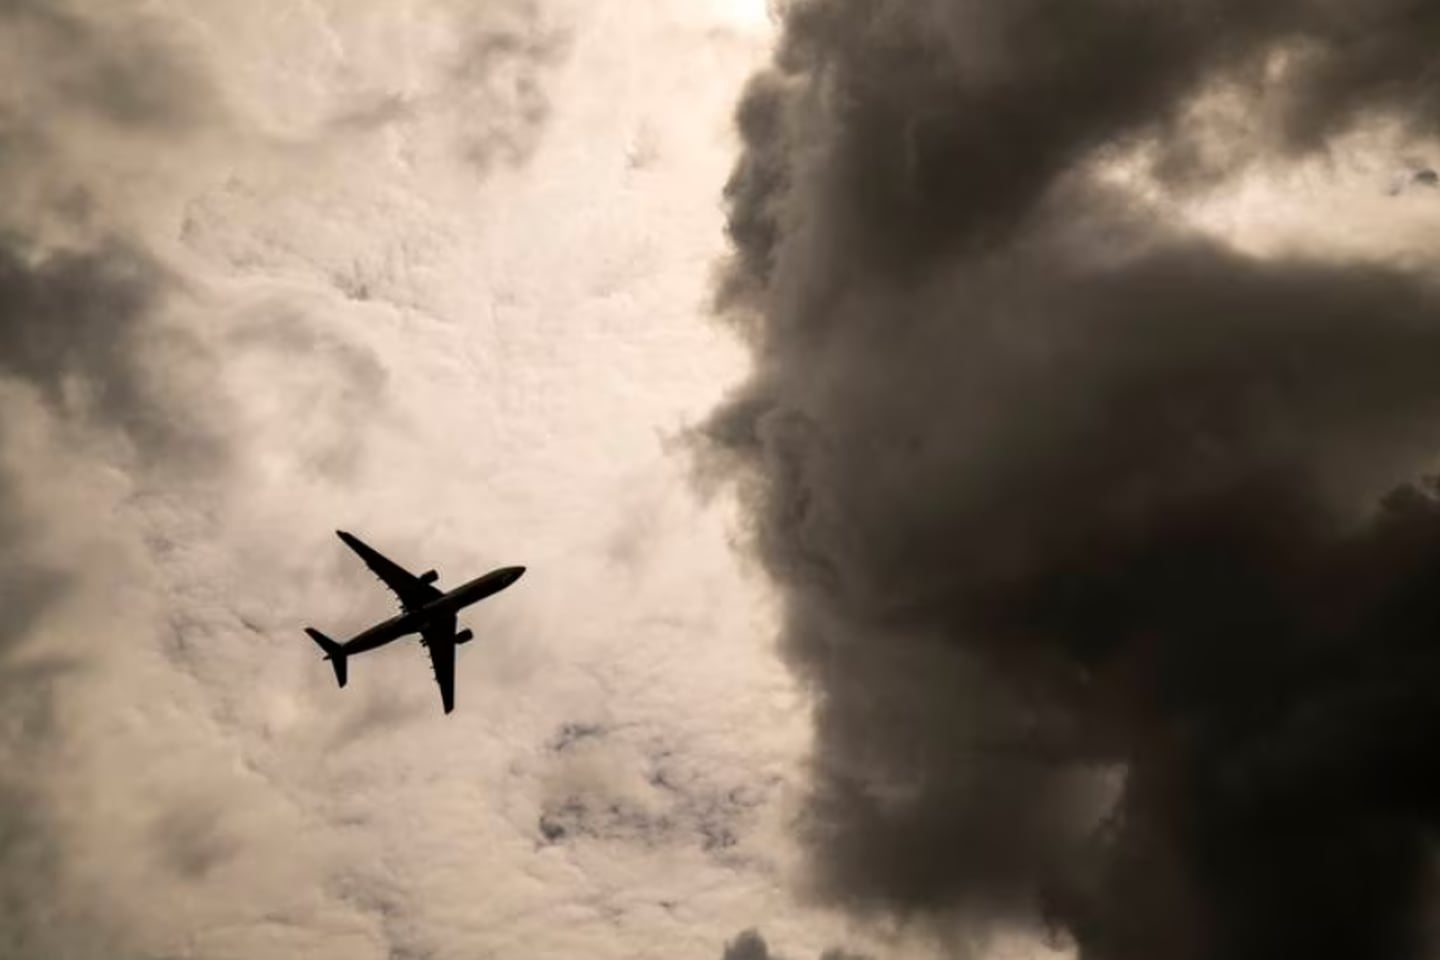 How climate change has made flight turbulence worse